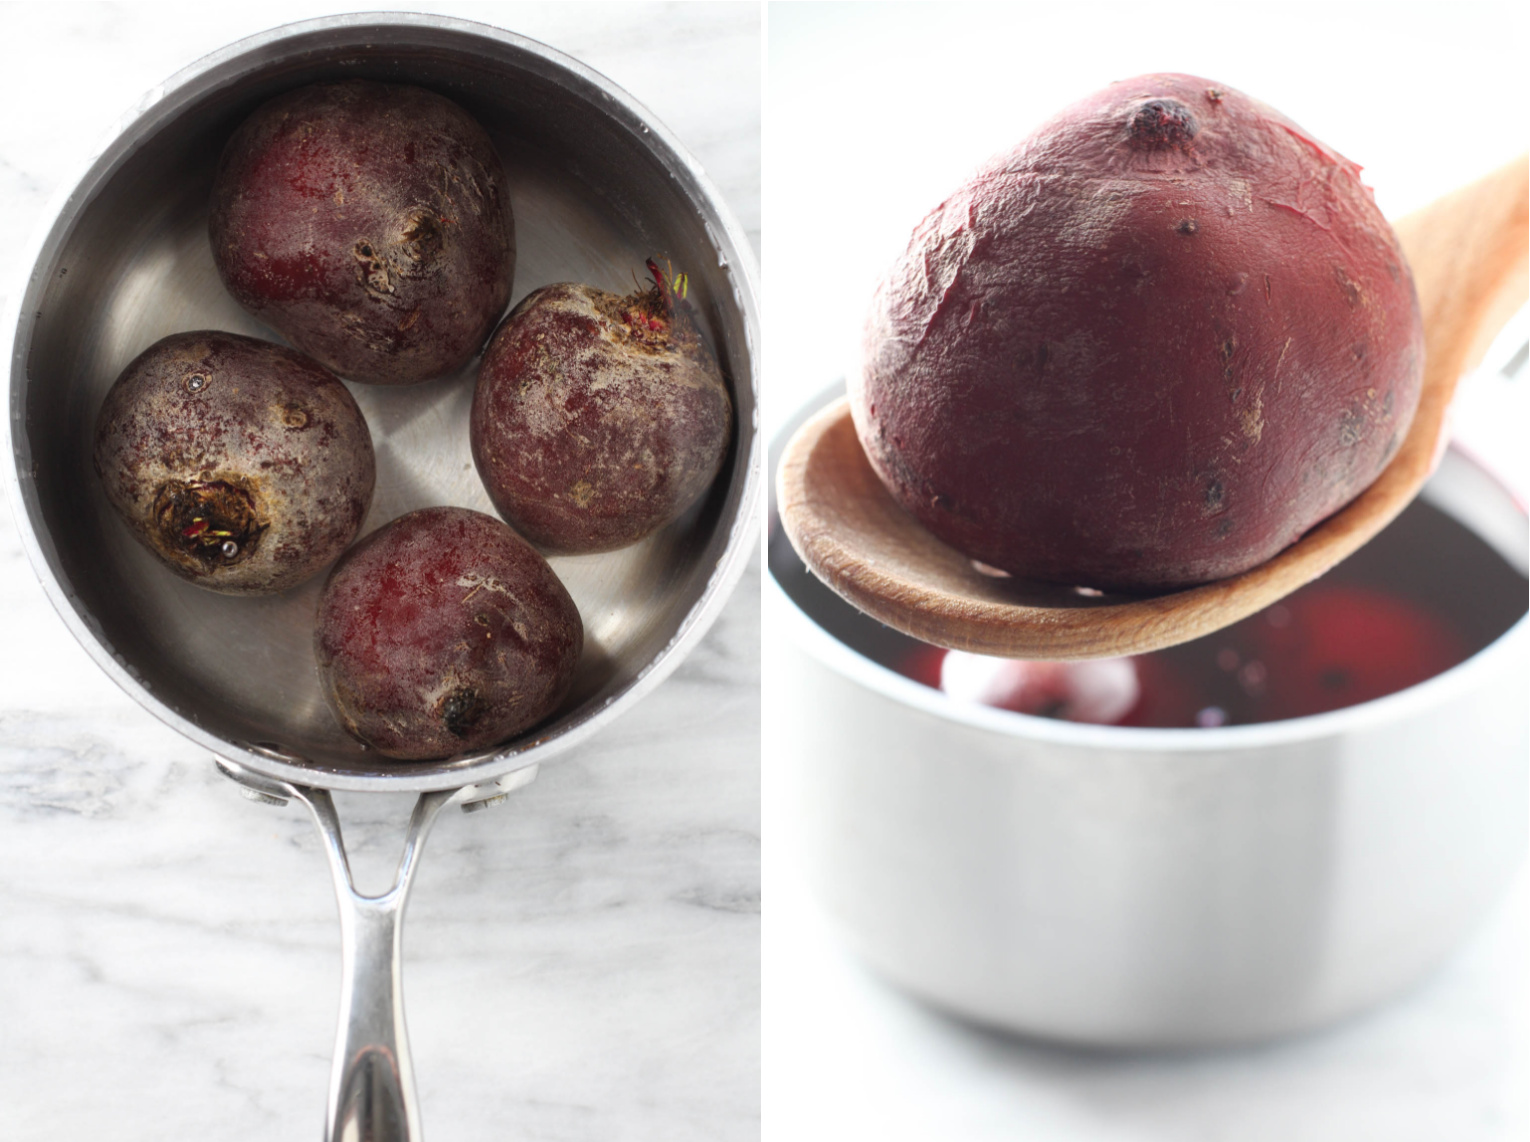 Two side-by-side images. On the left image, 4 beets in a saucepan. On the right image, a cooked beet on a wooden spoon.